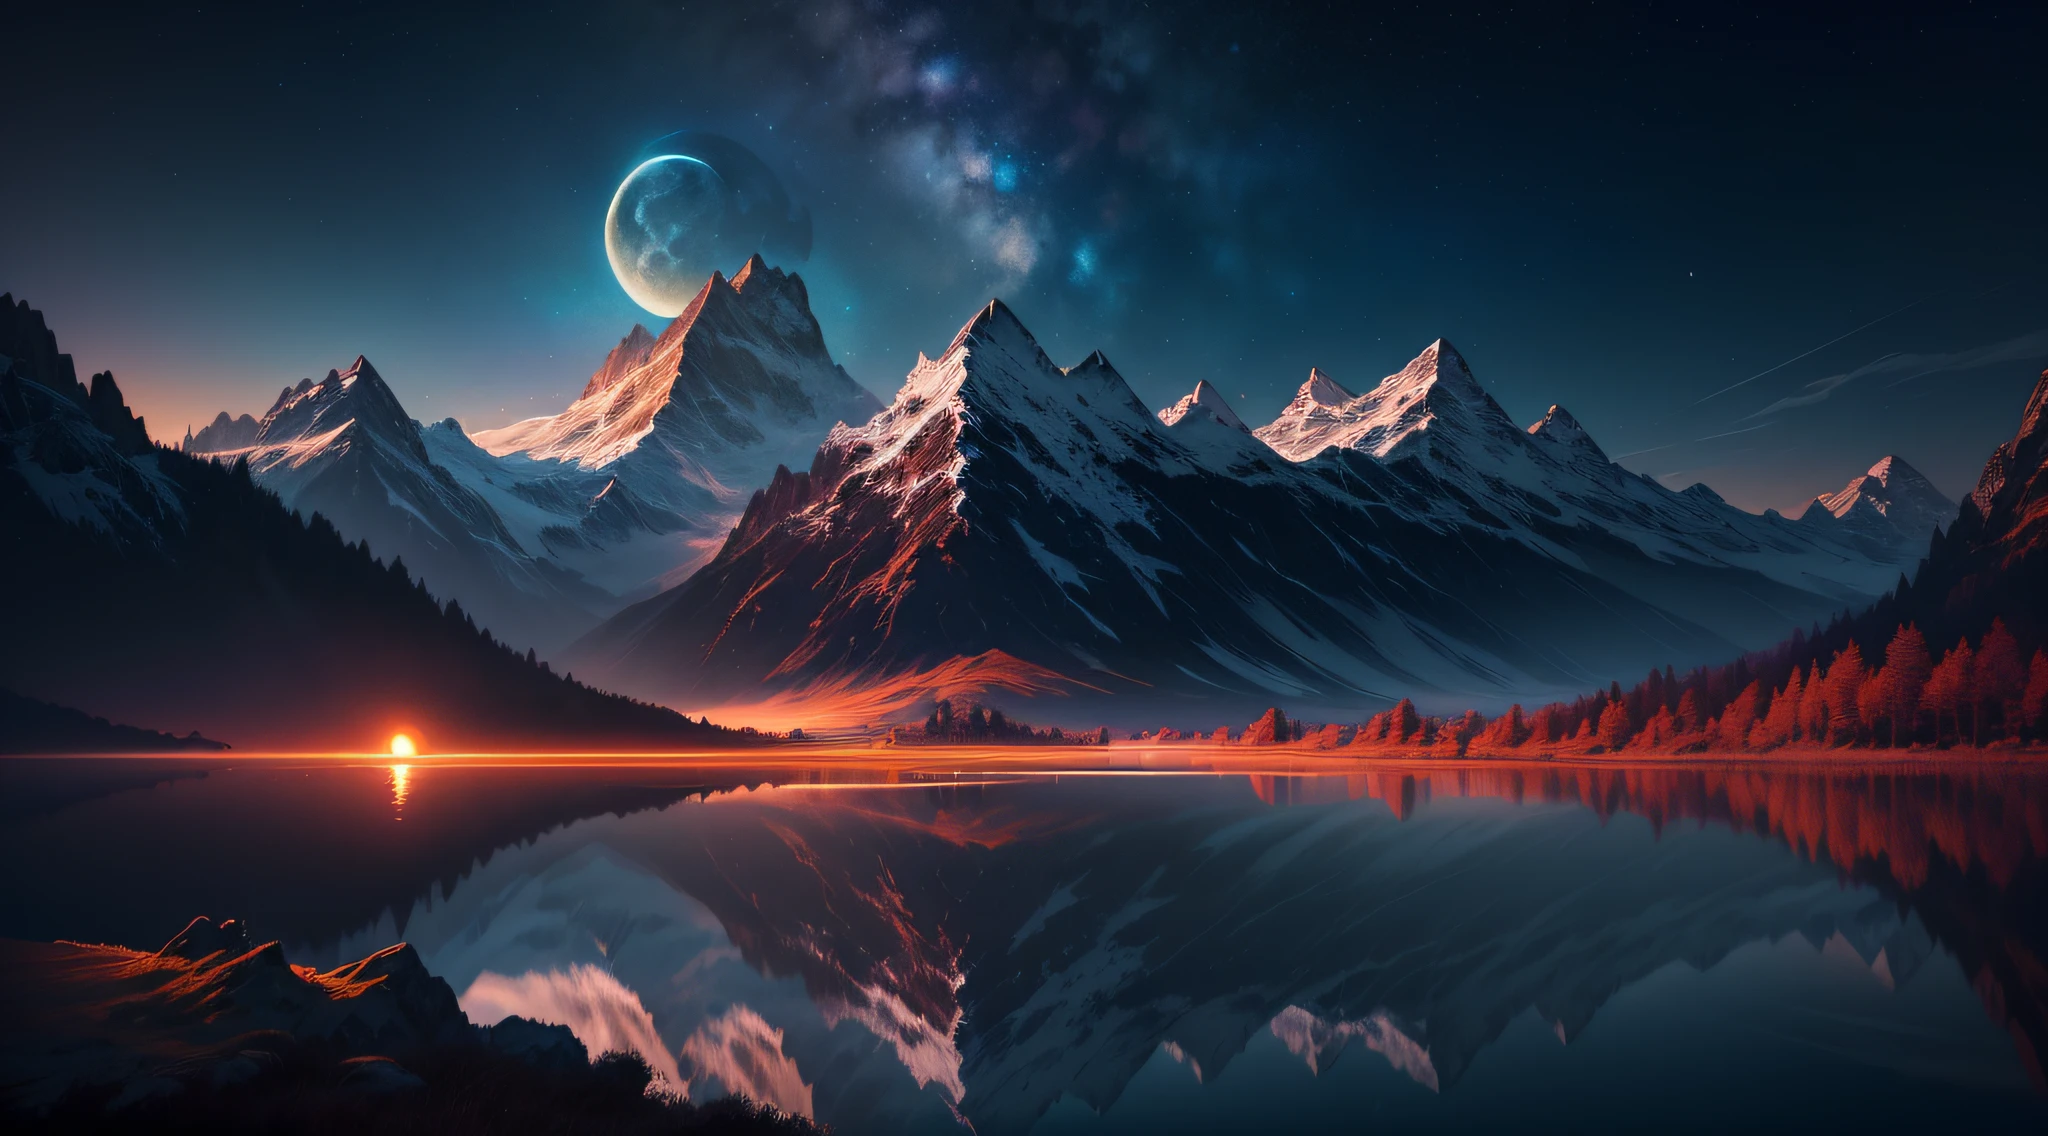 A mountain range with a moon and a lake in the foreground - SeaArt AI